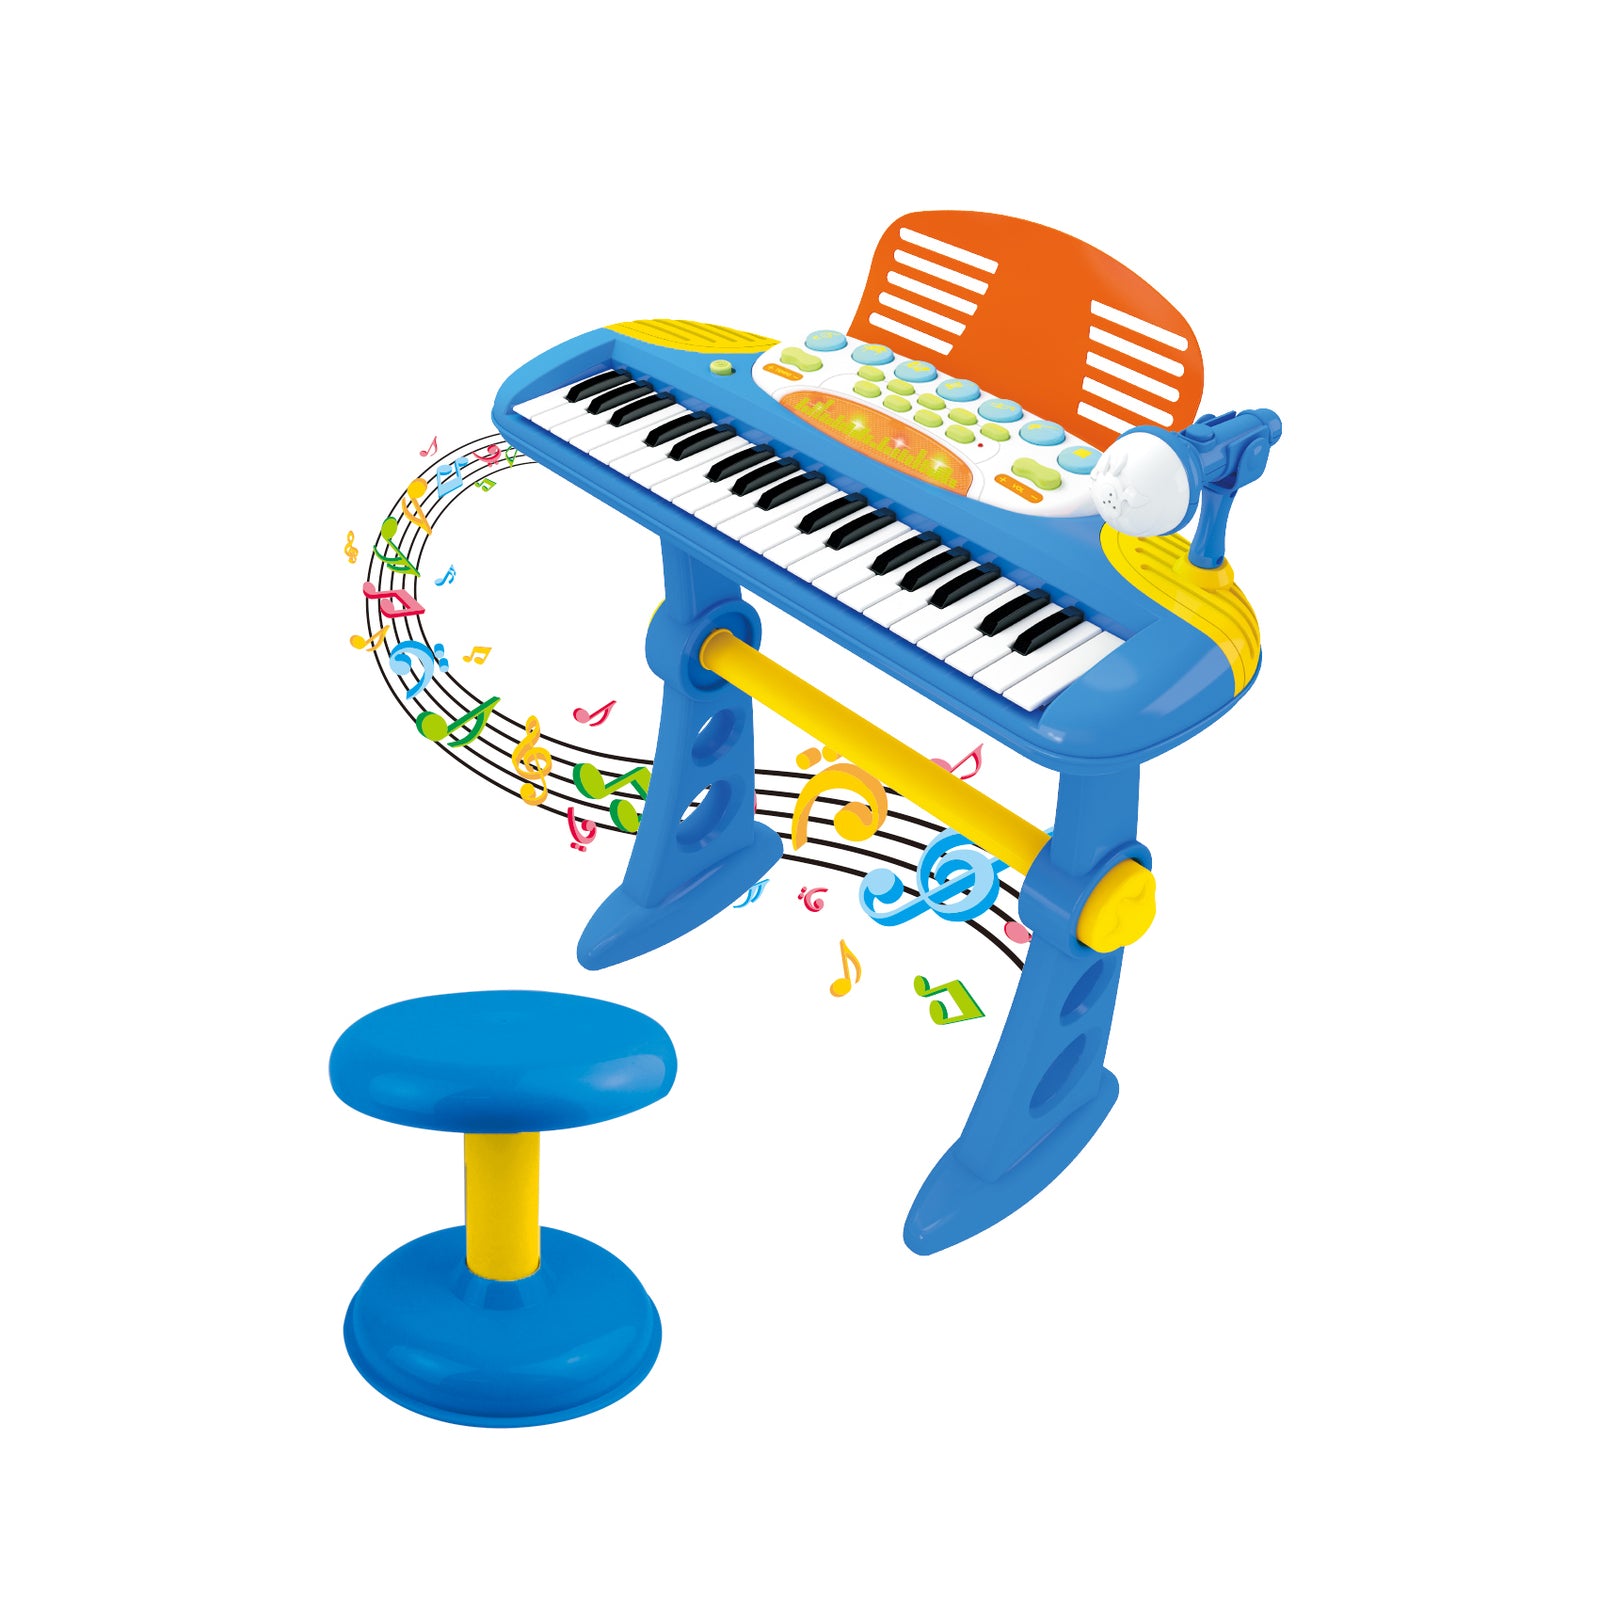 Children's Electronic Keyboard with Stand (Blue) Musical Instrument Toy - SILBERSHELL